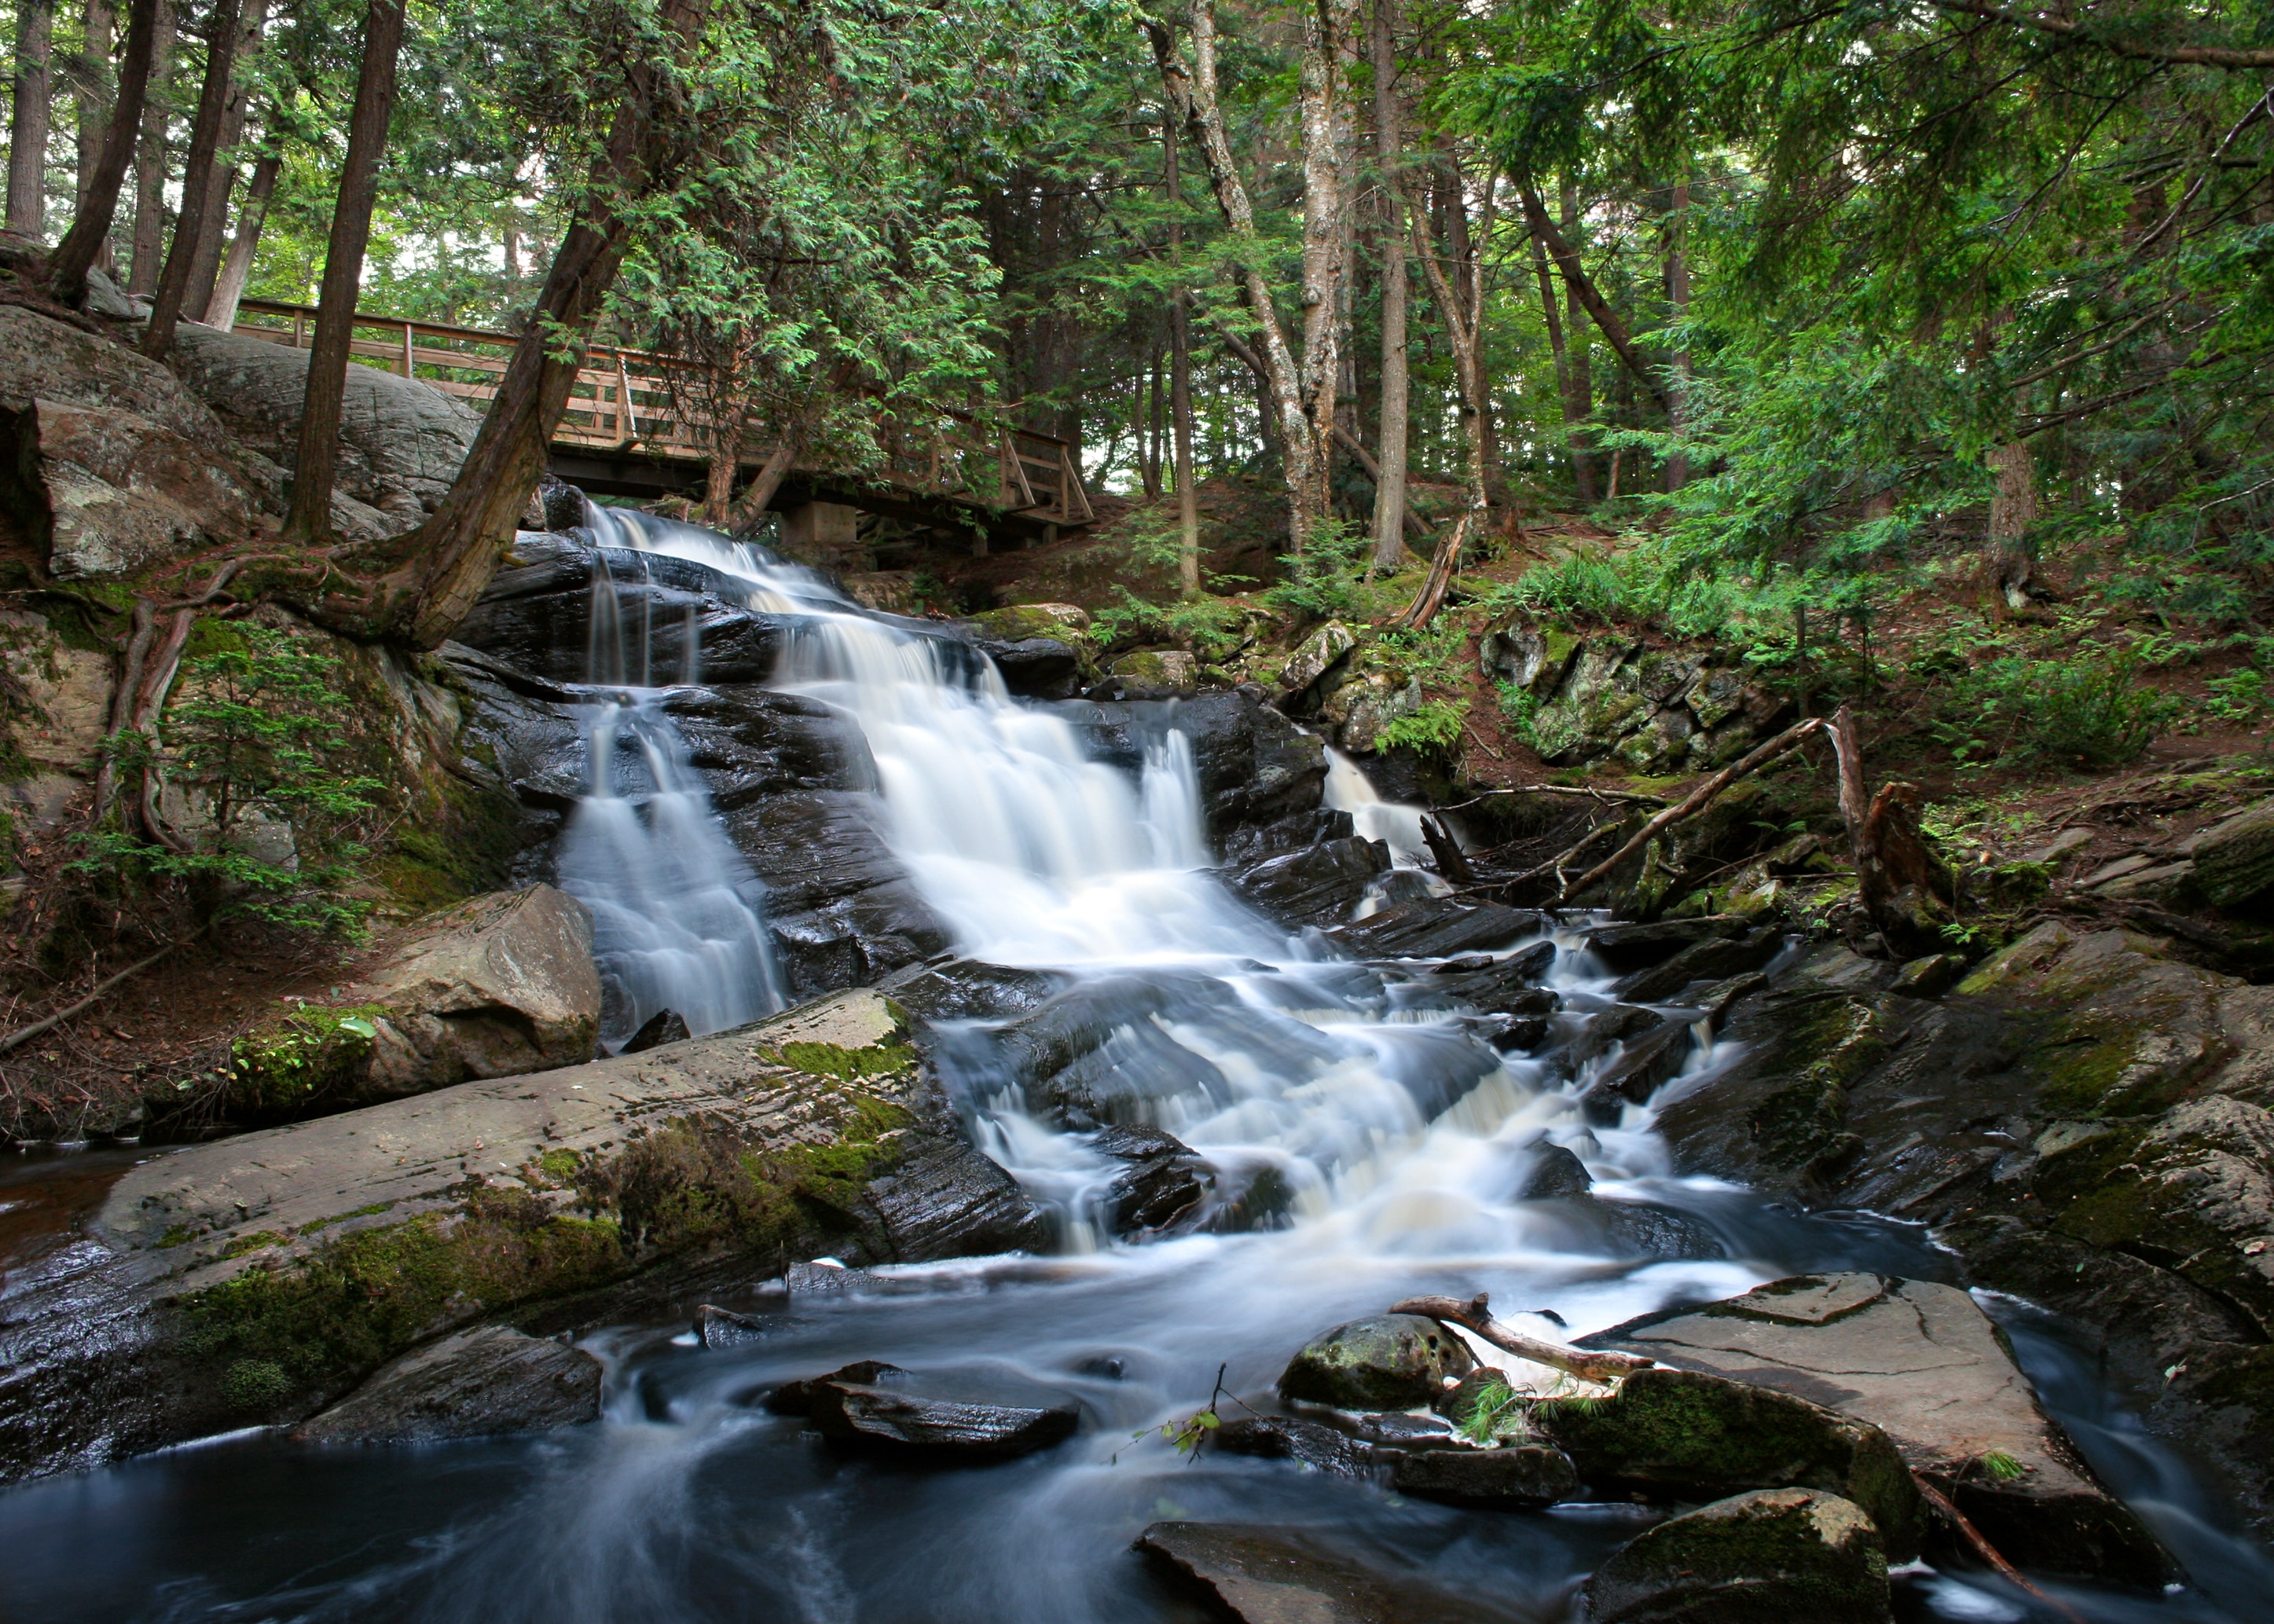 time-lapse photography of water flowing on rocks surrounded with trees at daytime